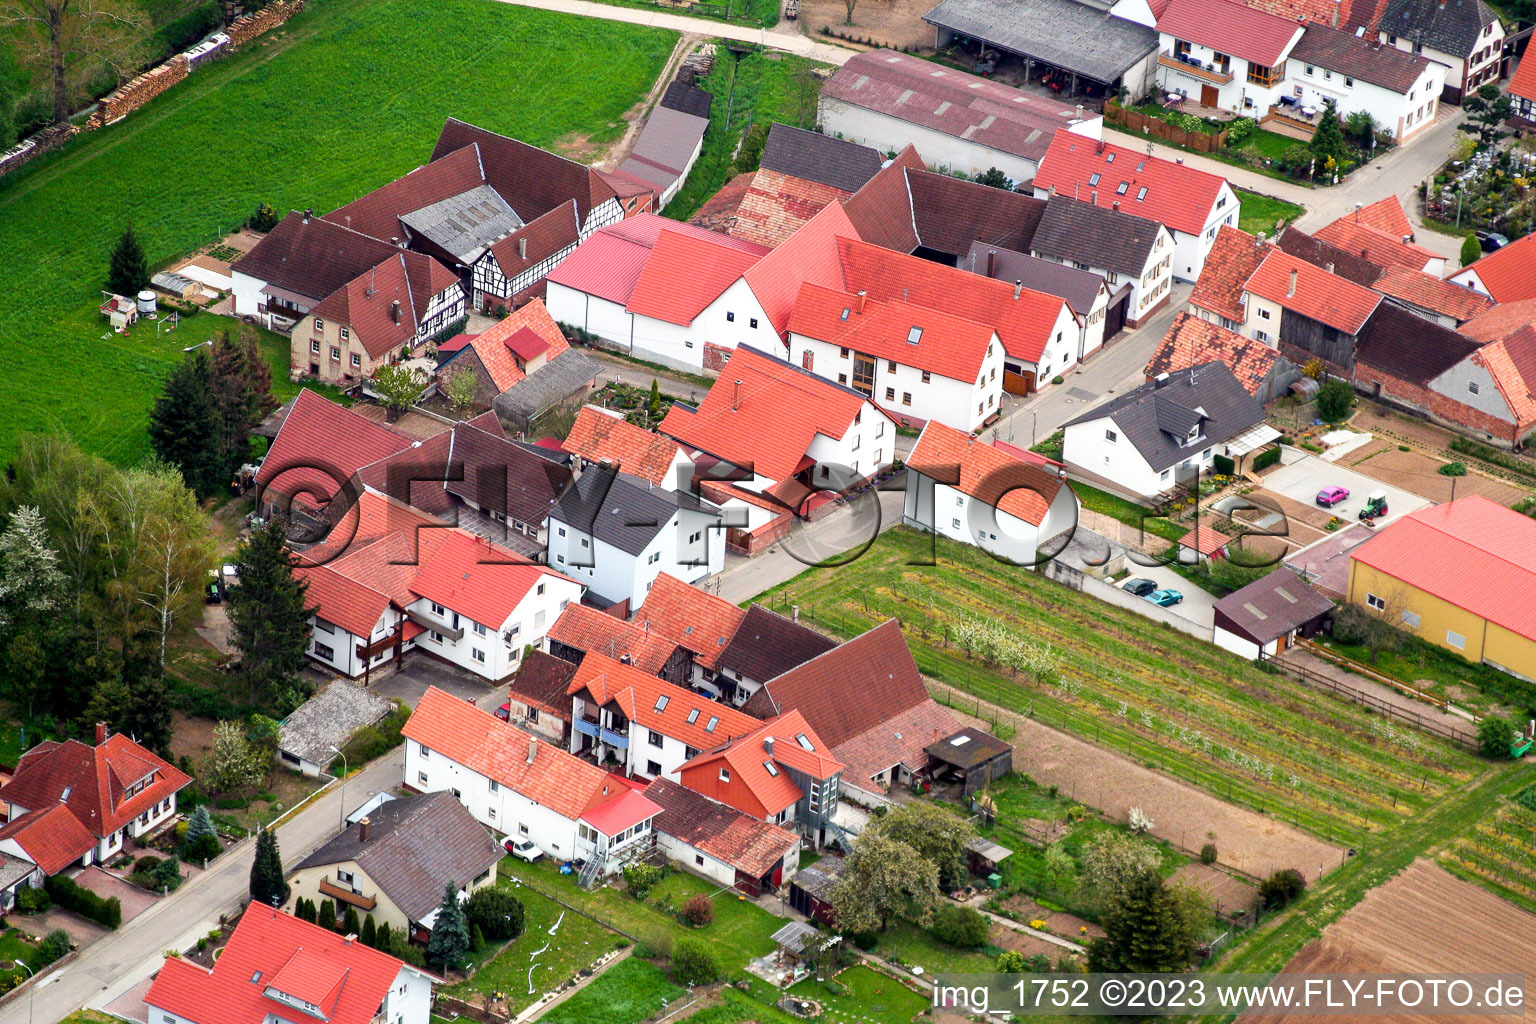 Drone image of Oberhausen in the state Rhineland-Palatinate, Germany